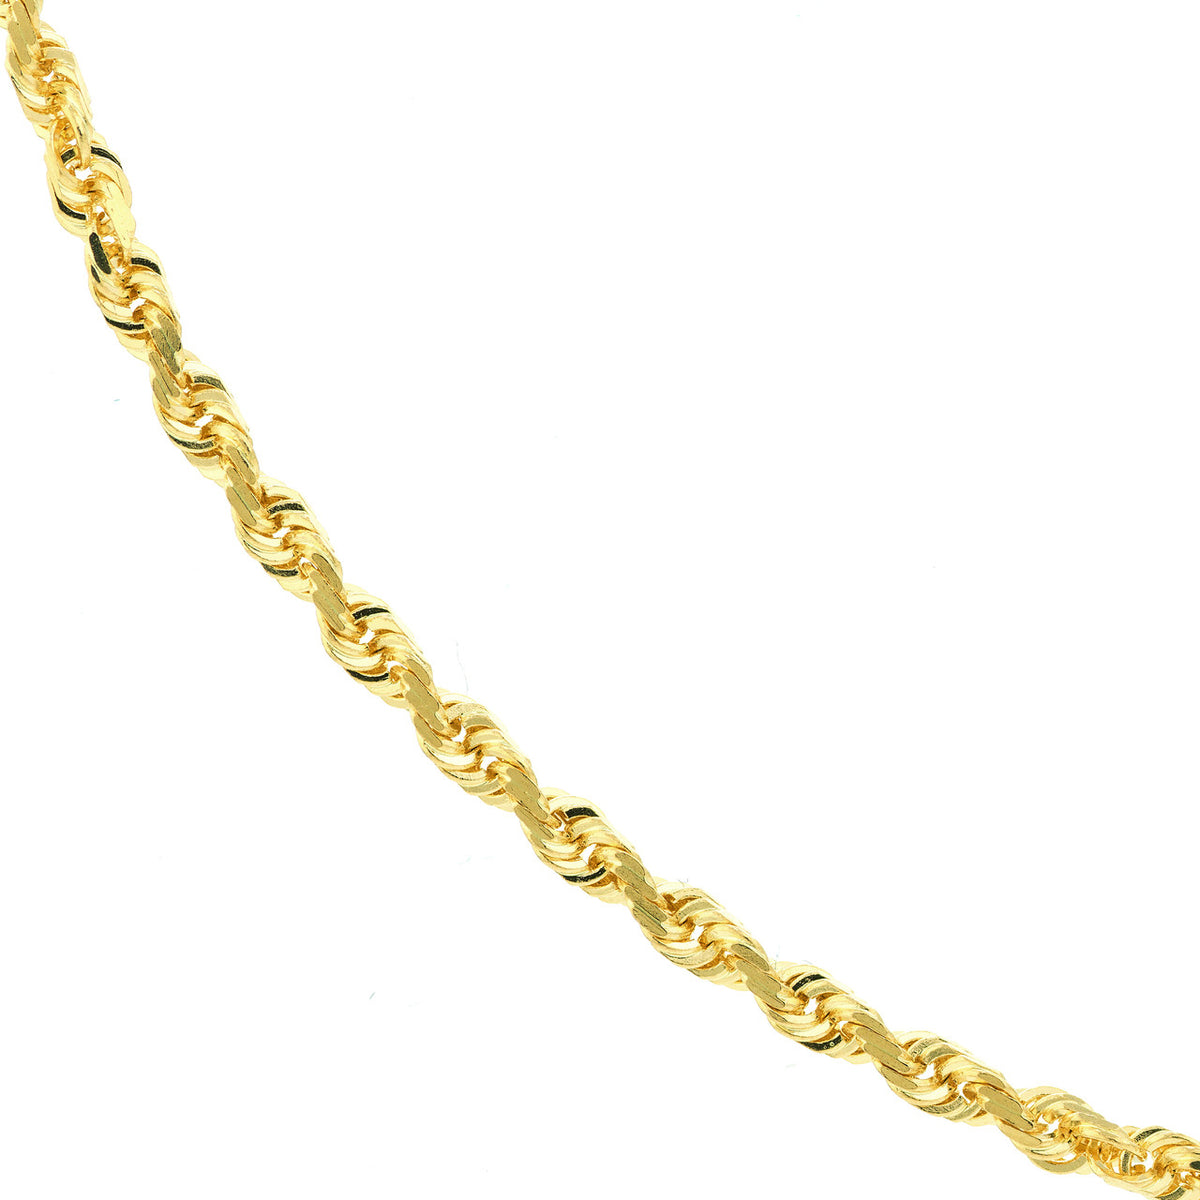 14K Yellow Gold or White Gold 2.15mm D/C Rope Chain Necklace with Lobster Lock